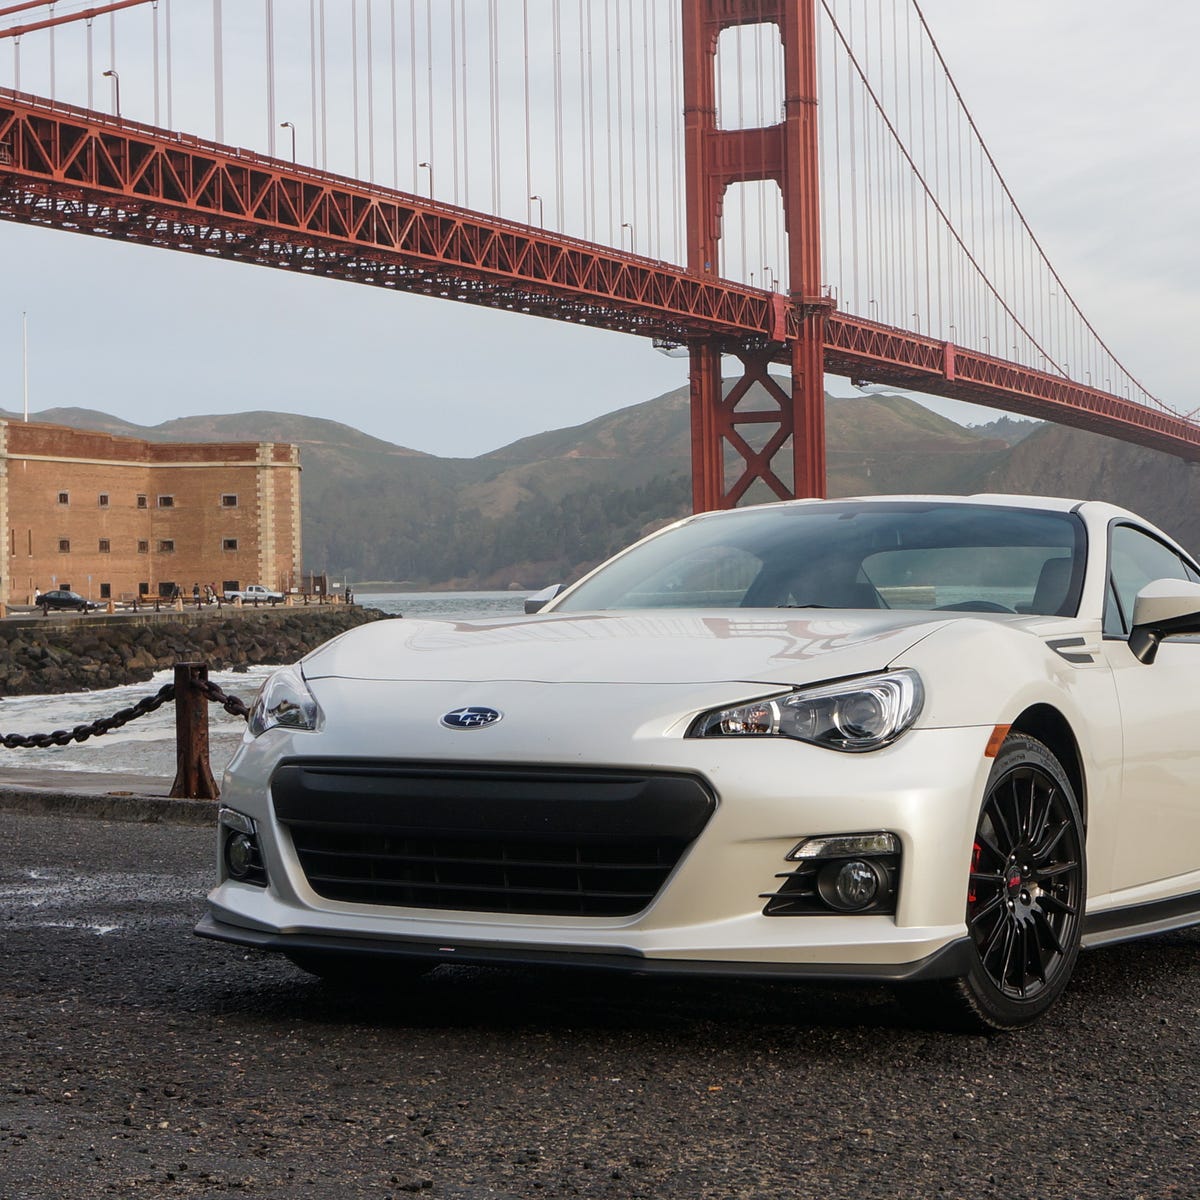 2015 Subaru BRZ review: Subaru's sport coupe goes from over-hyped to  underrated - CNET